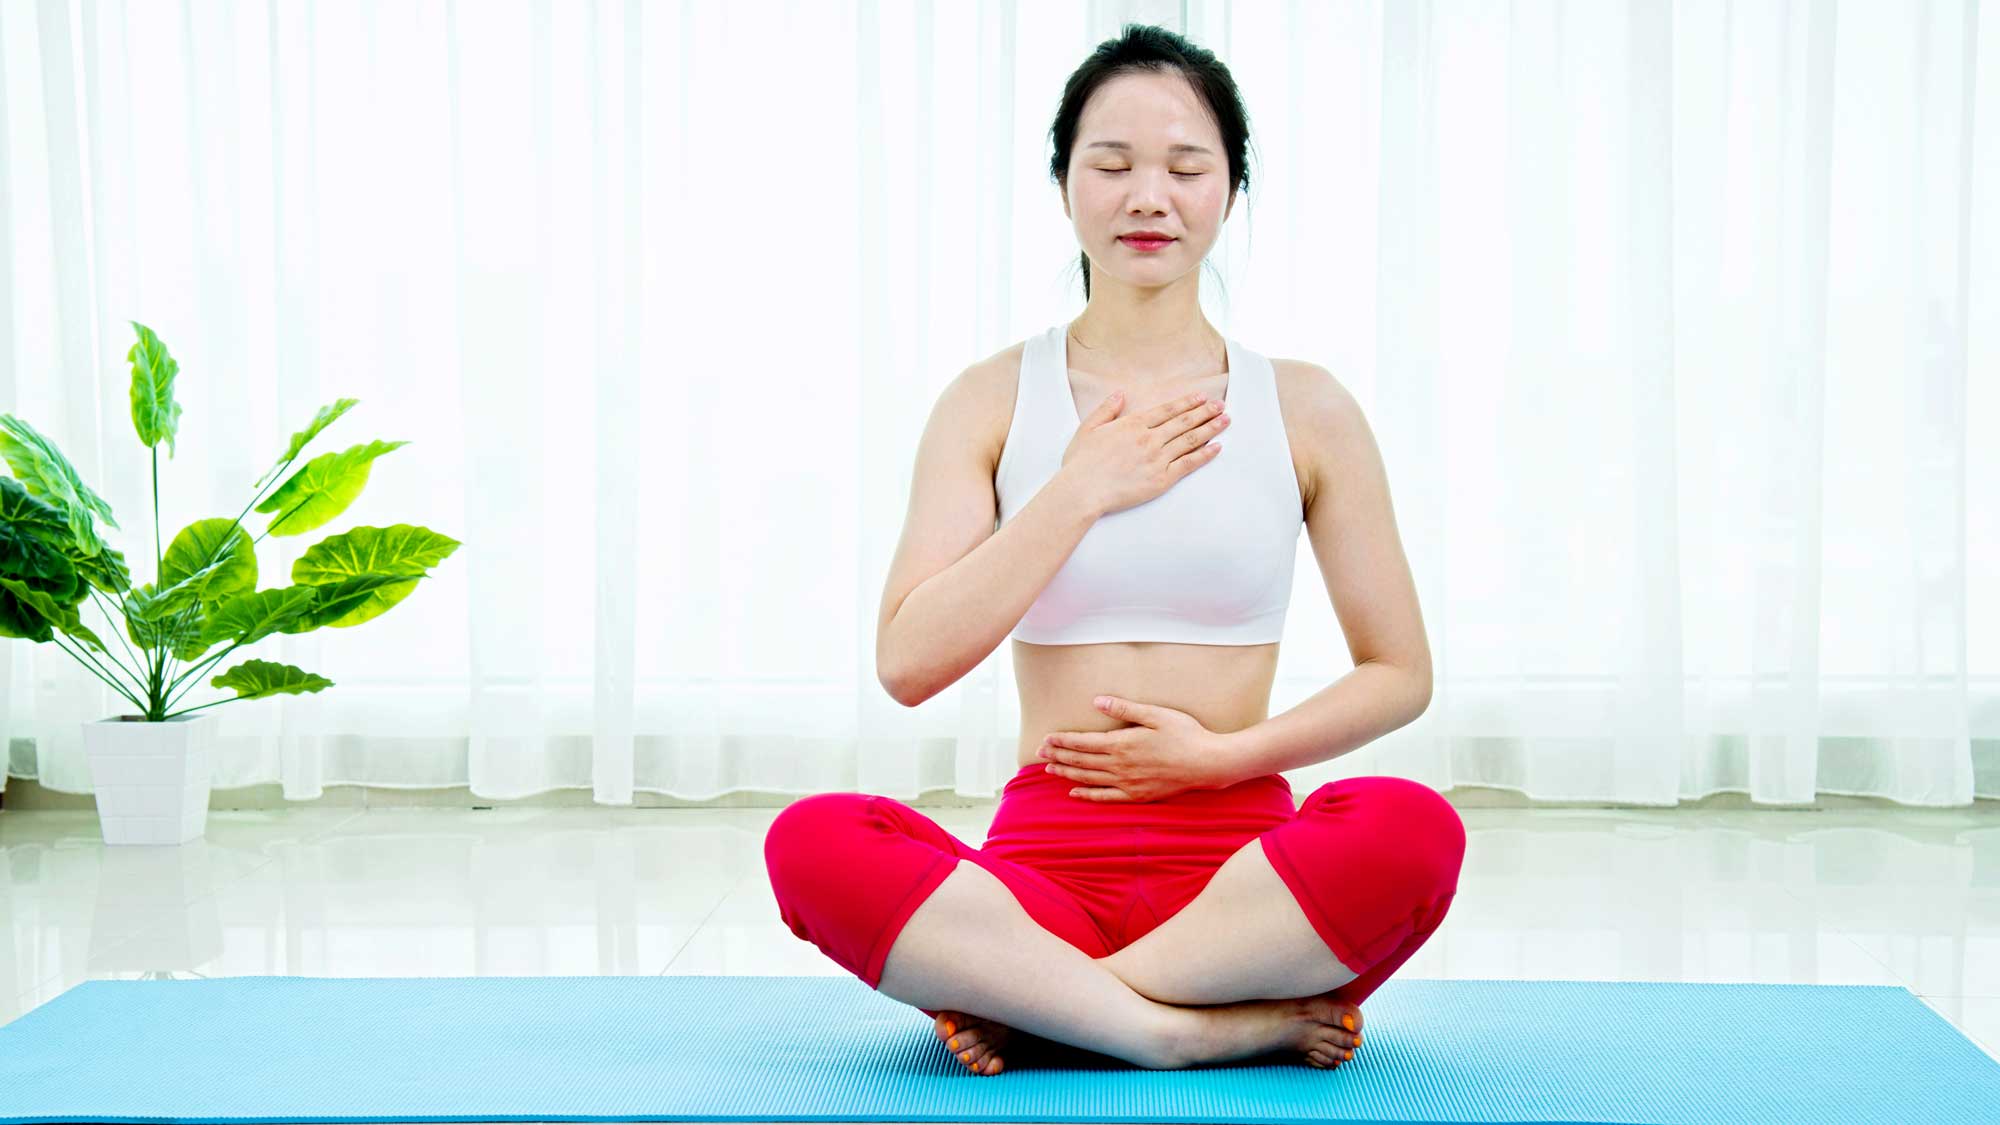 6 Best Yoga Poses To Soothe Menopause Symptoms | Prevention